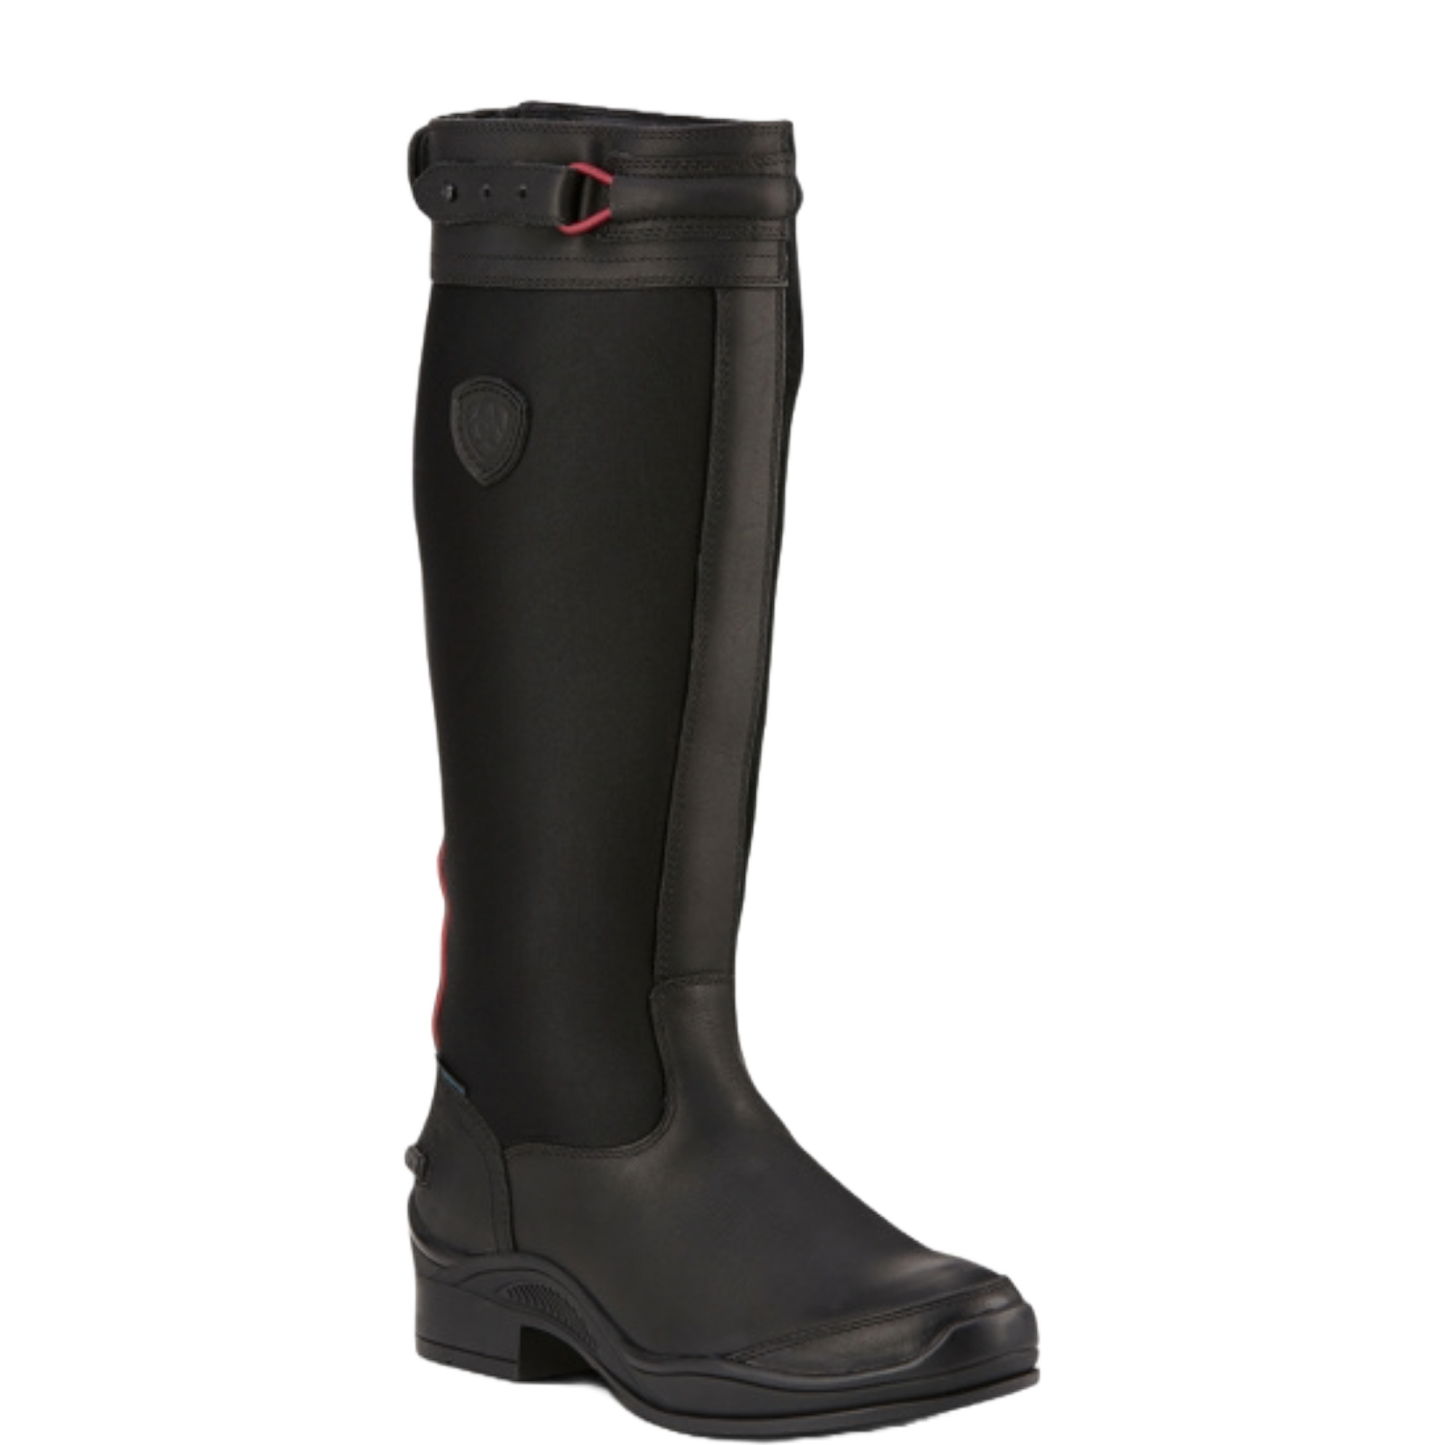 Ariat Ladies Extreme Waterproof Insulated Black Tall Riding Boots 10016384